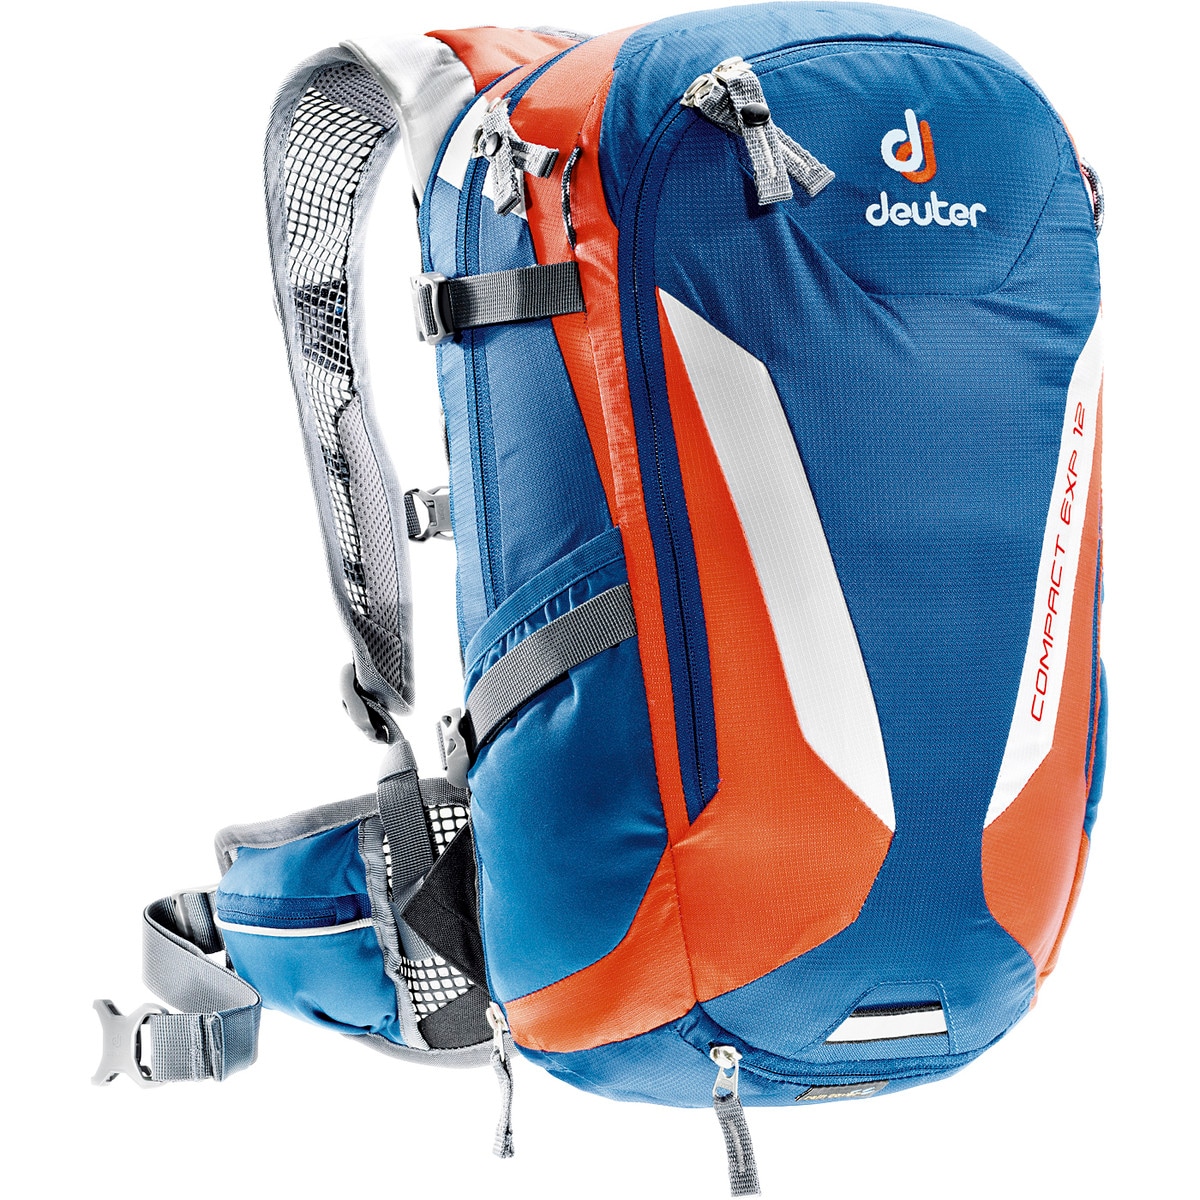 Deuter Compact EXP 12 Hydration Pack 730 900cu in